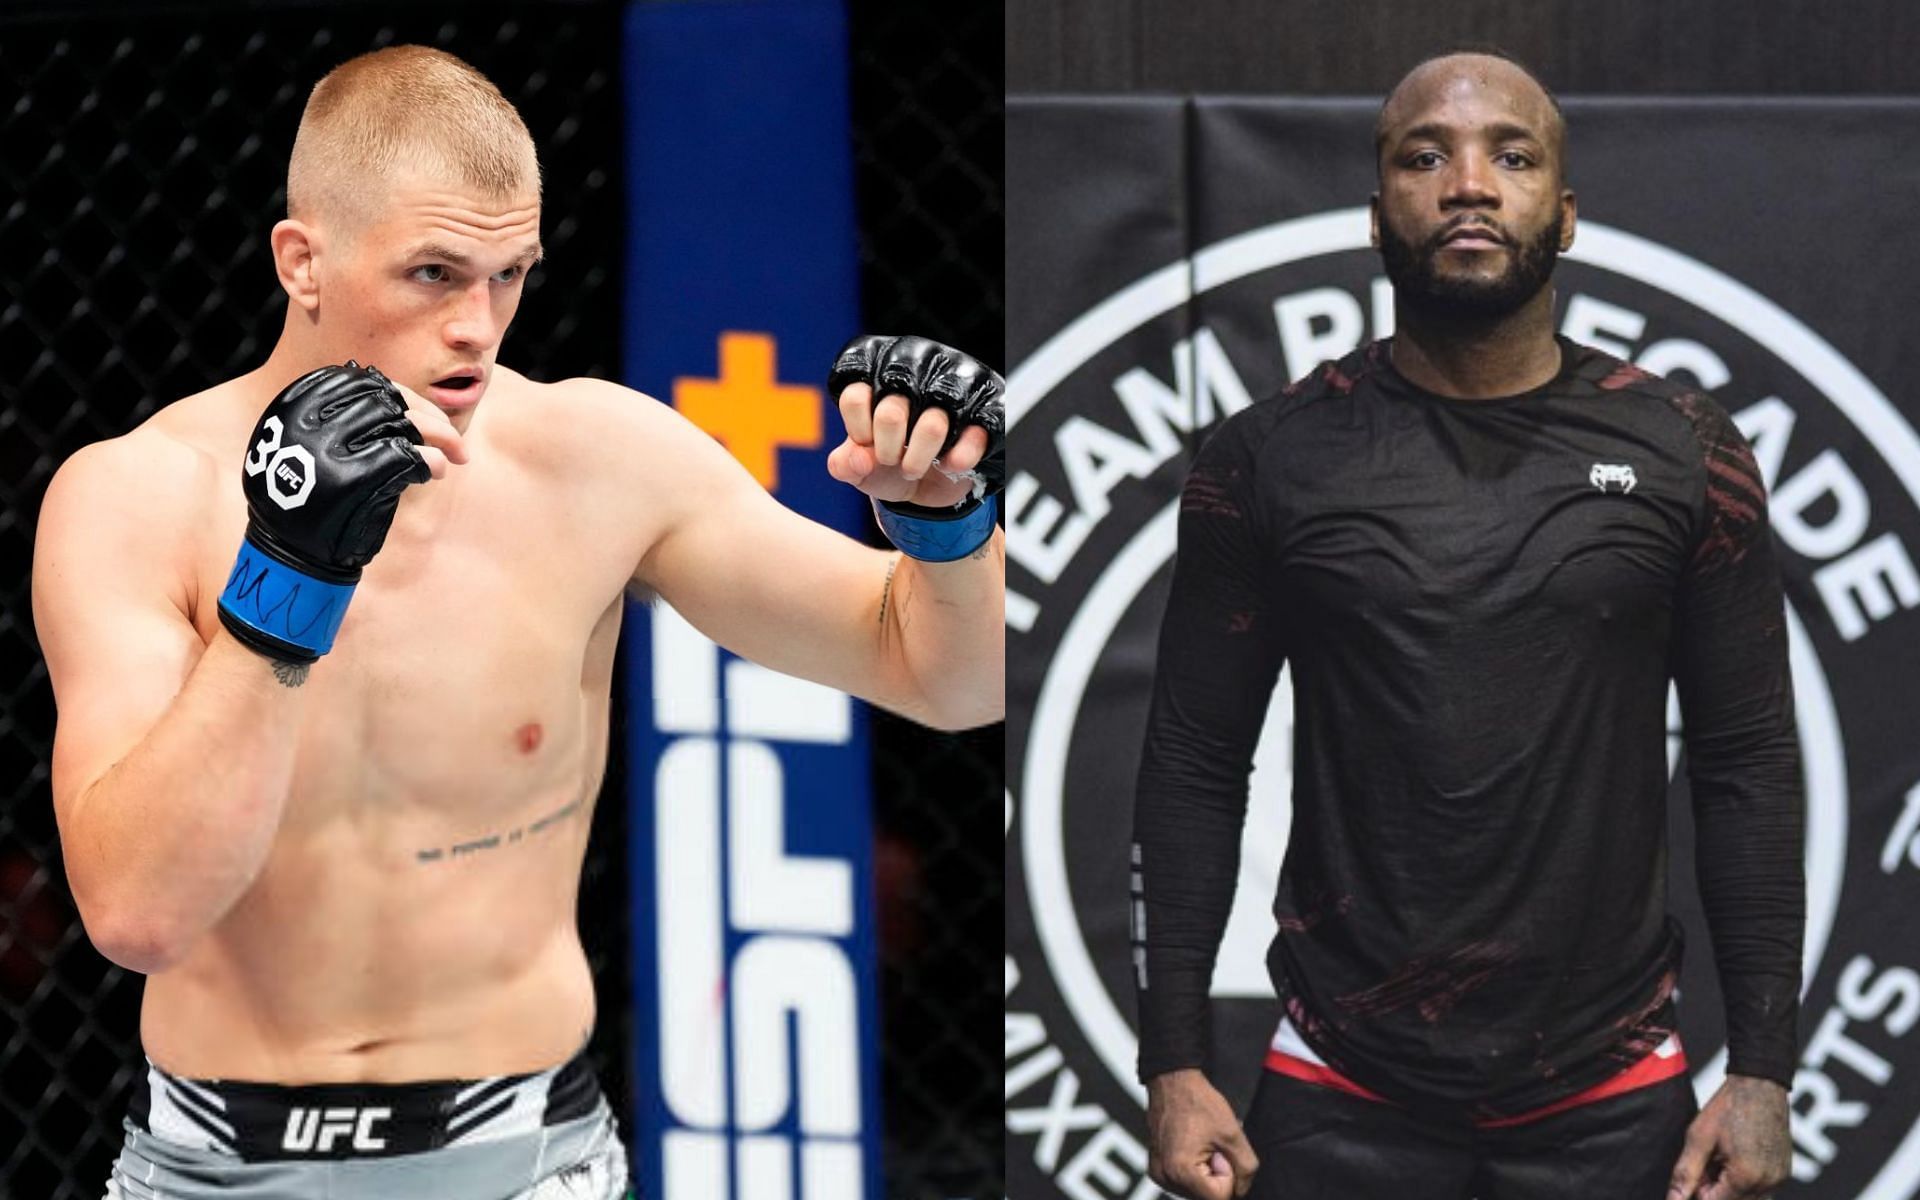 Ian Garry (left) anfd Leon Edwards (right) [Images Courtesy: @GettyImages and @leonedwardsmma on Instagram]